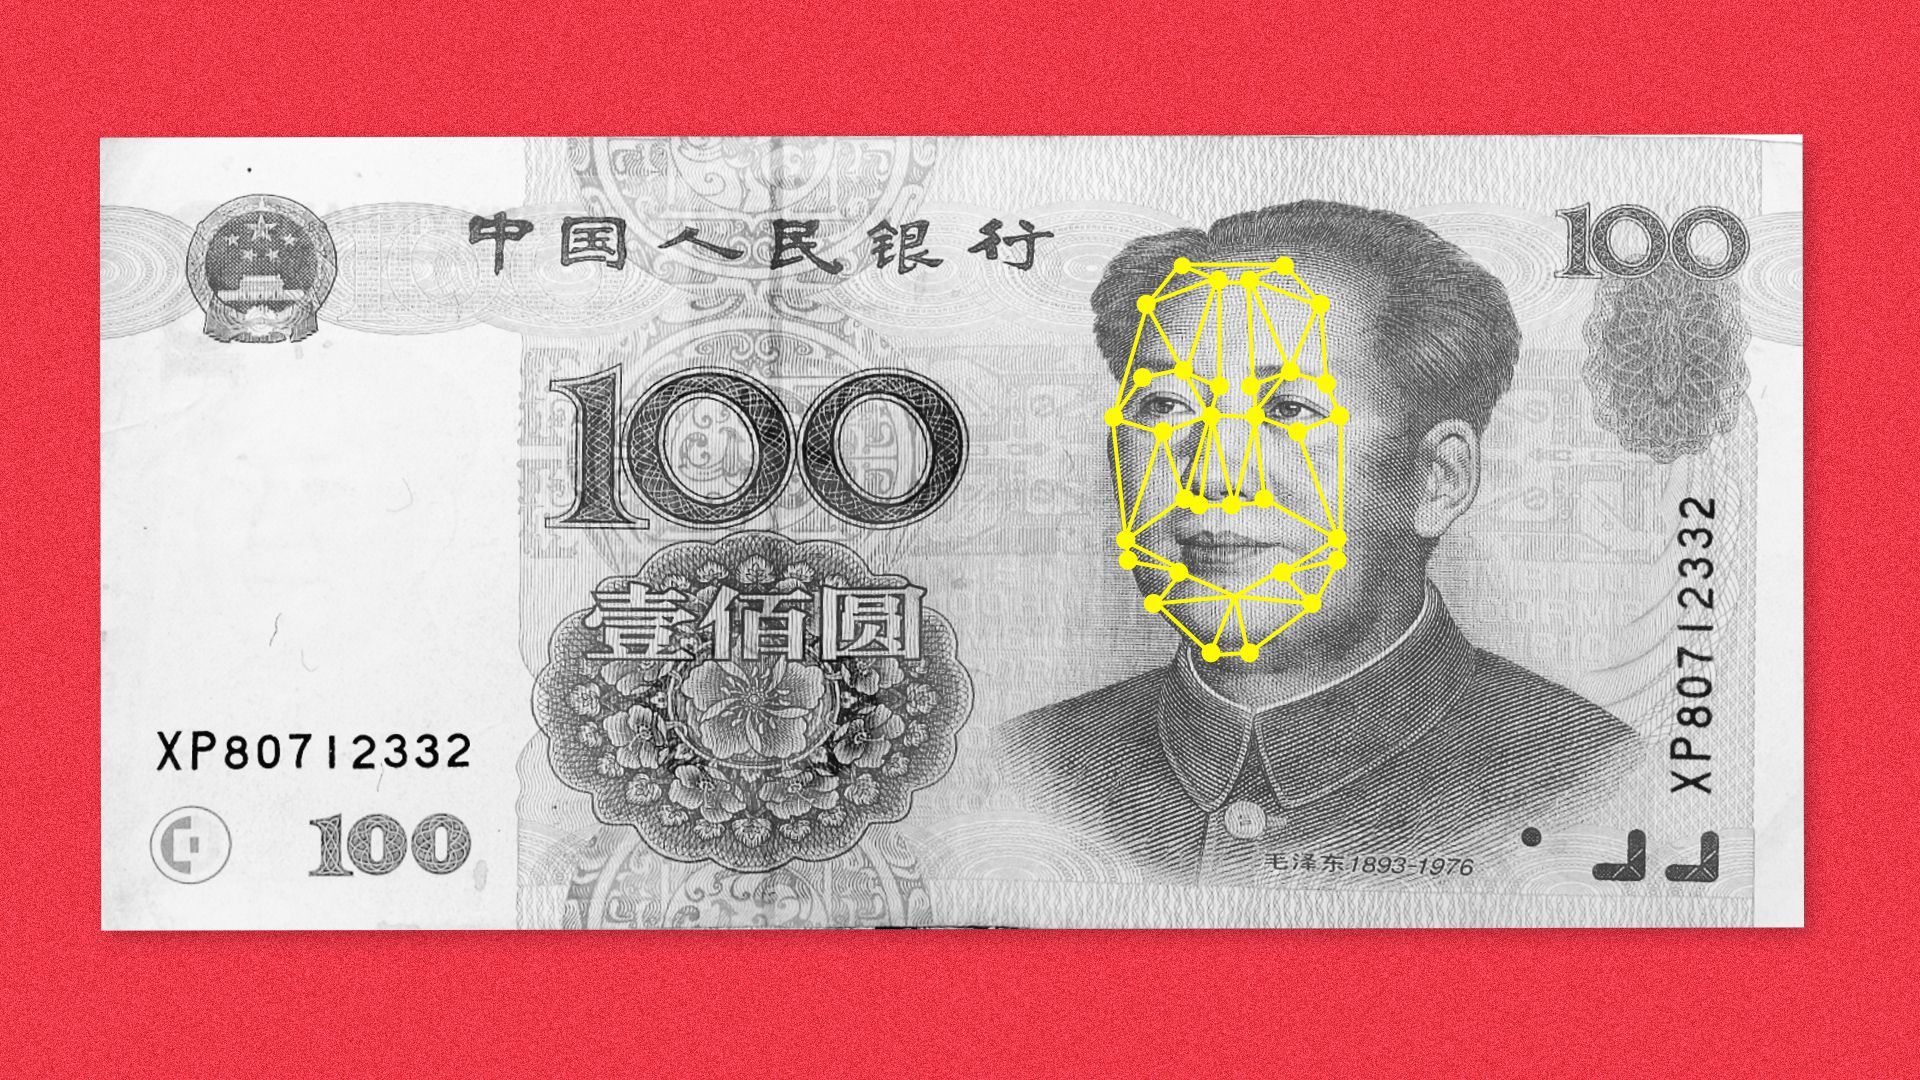 Illustration of a Yuan/Renminbi with facial recognition points on Mao Zedong's face